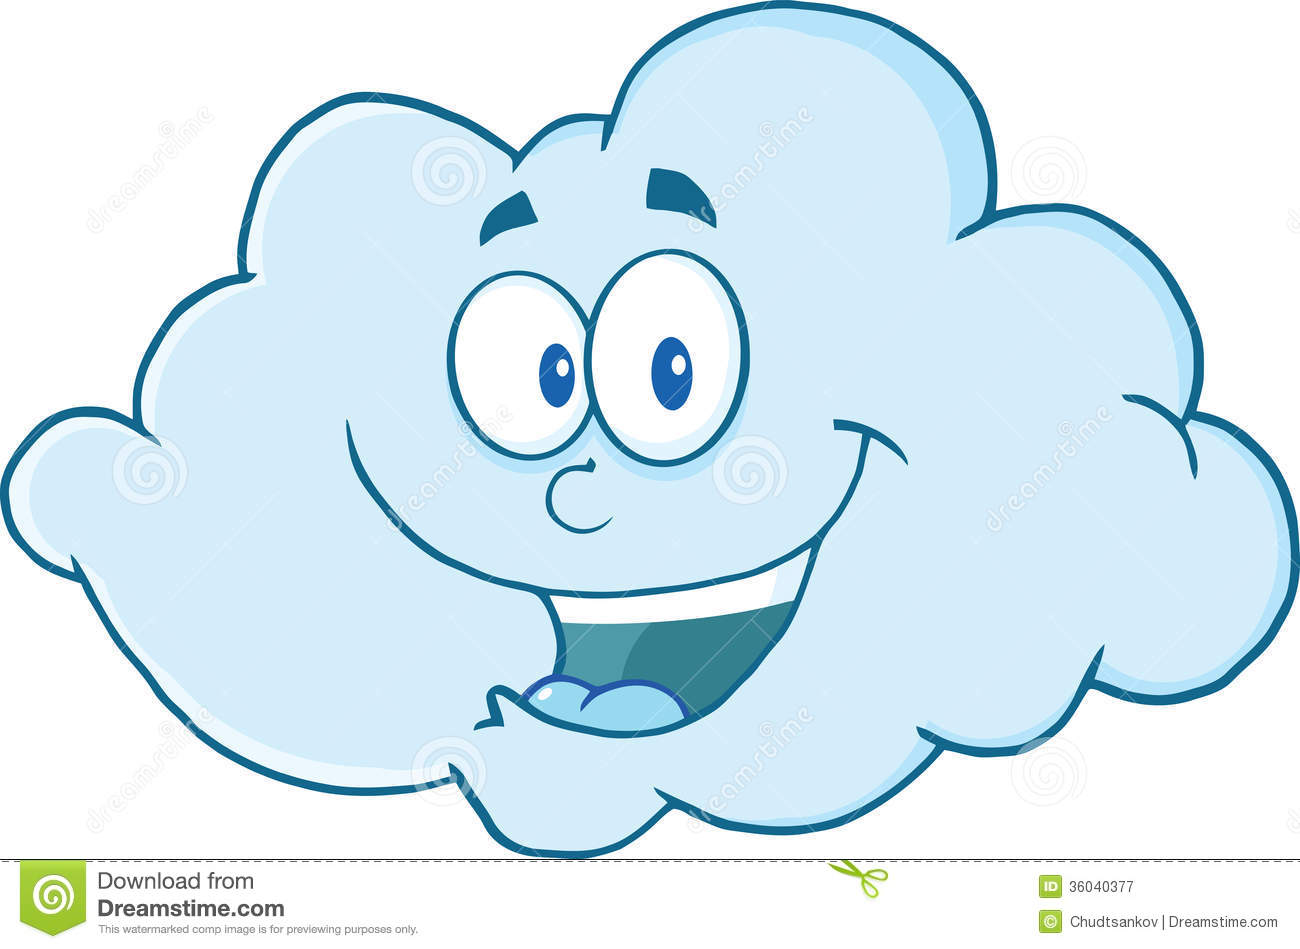 Happy Cloud Cartoon Character Royalty Free Stock Photography   Image